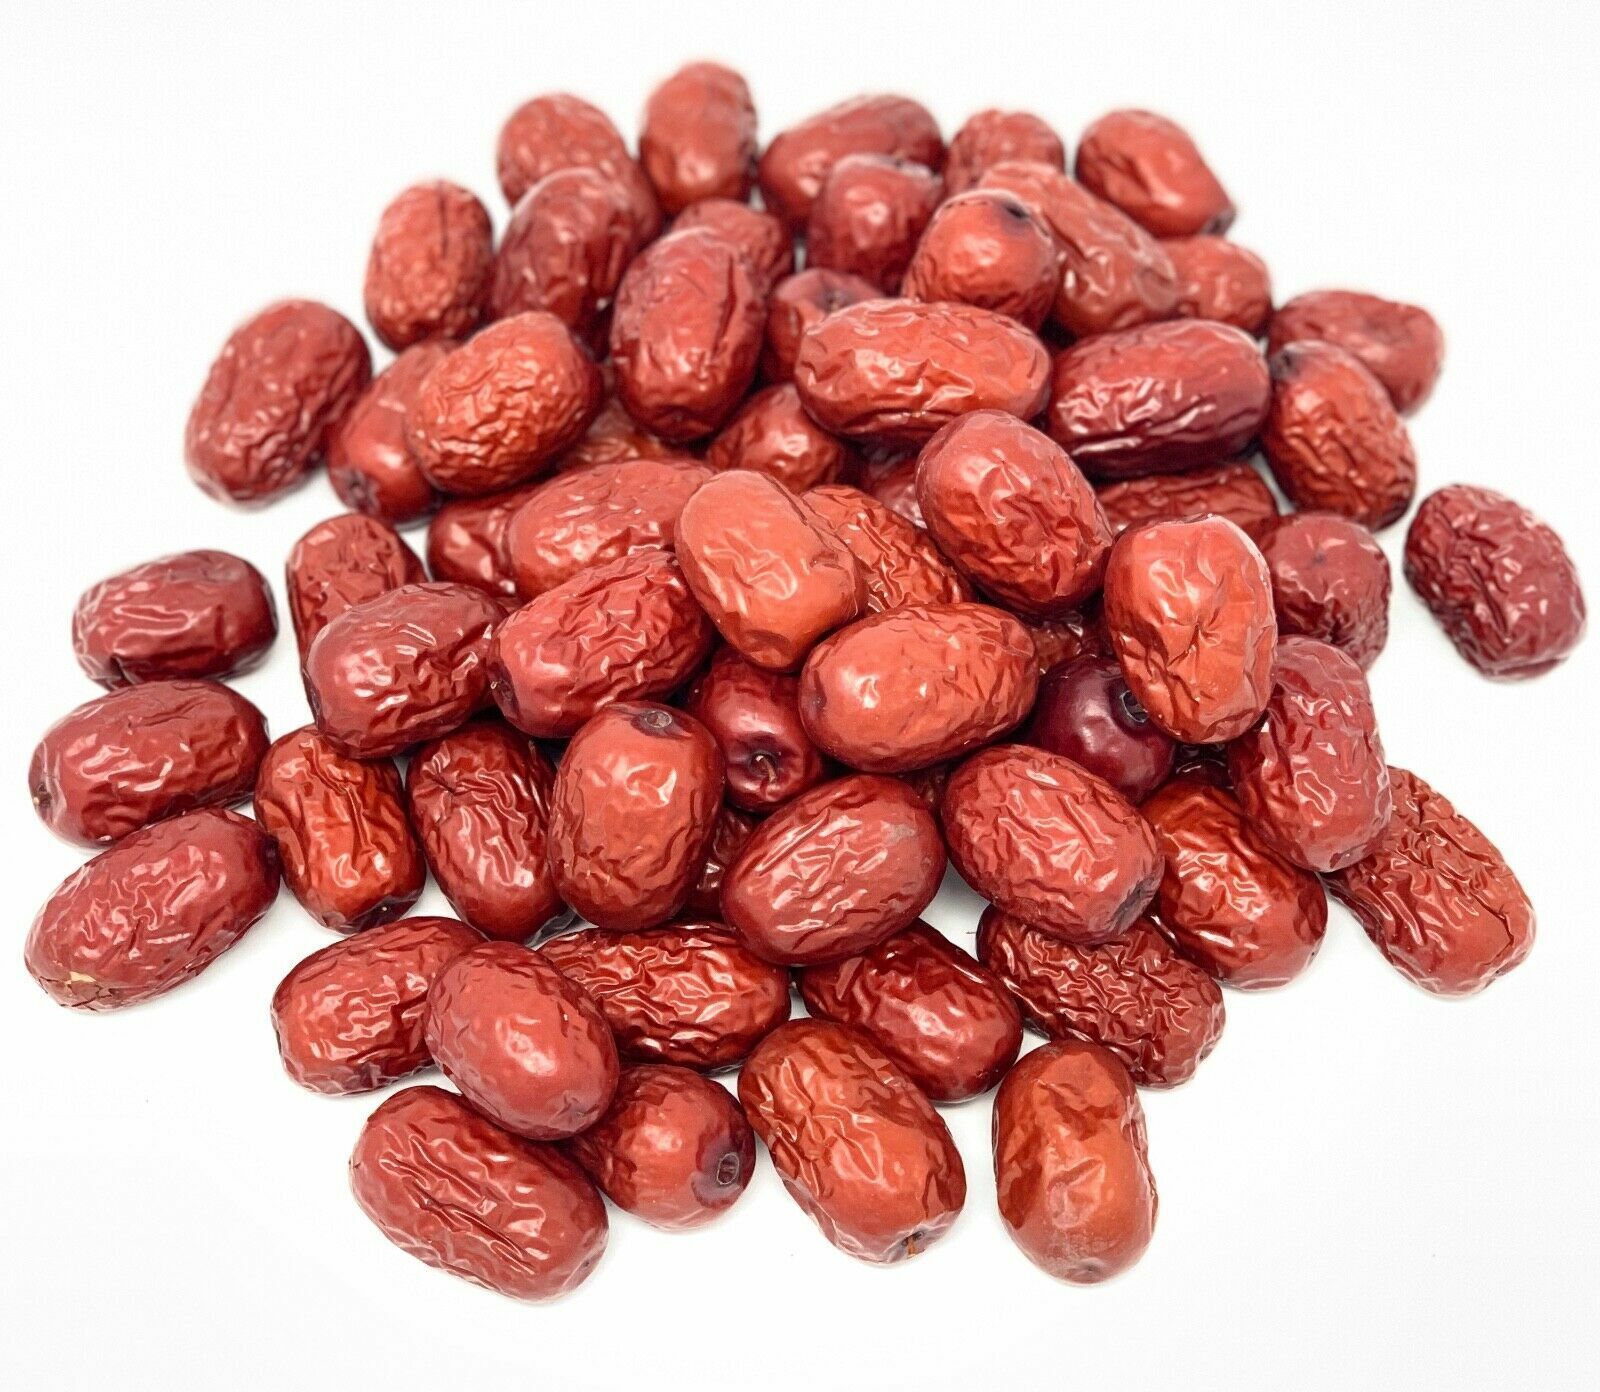 0.5LB-5LB Dried Red Dates Red Jujube Chinese Dates Natural Sweet Sun Dried 新疆红棗